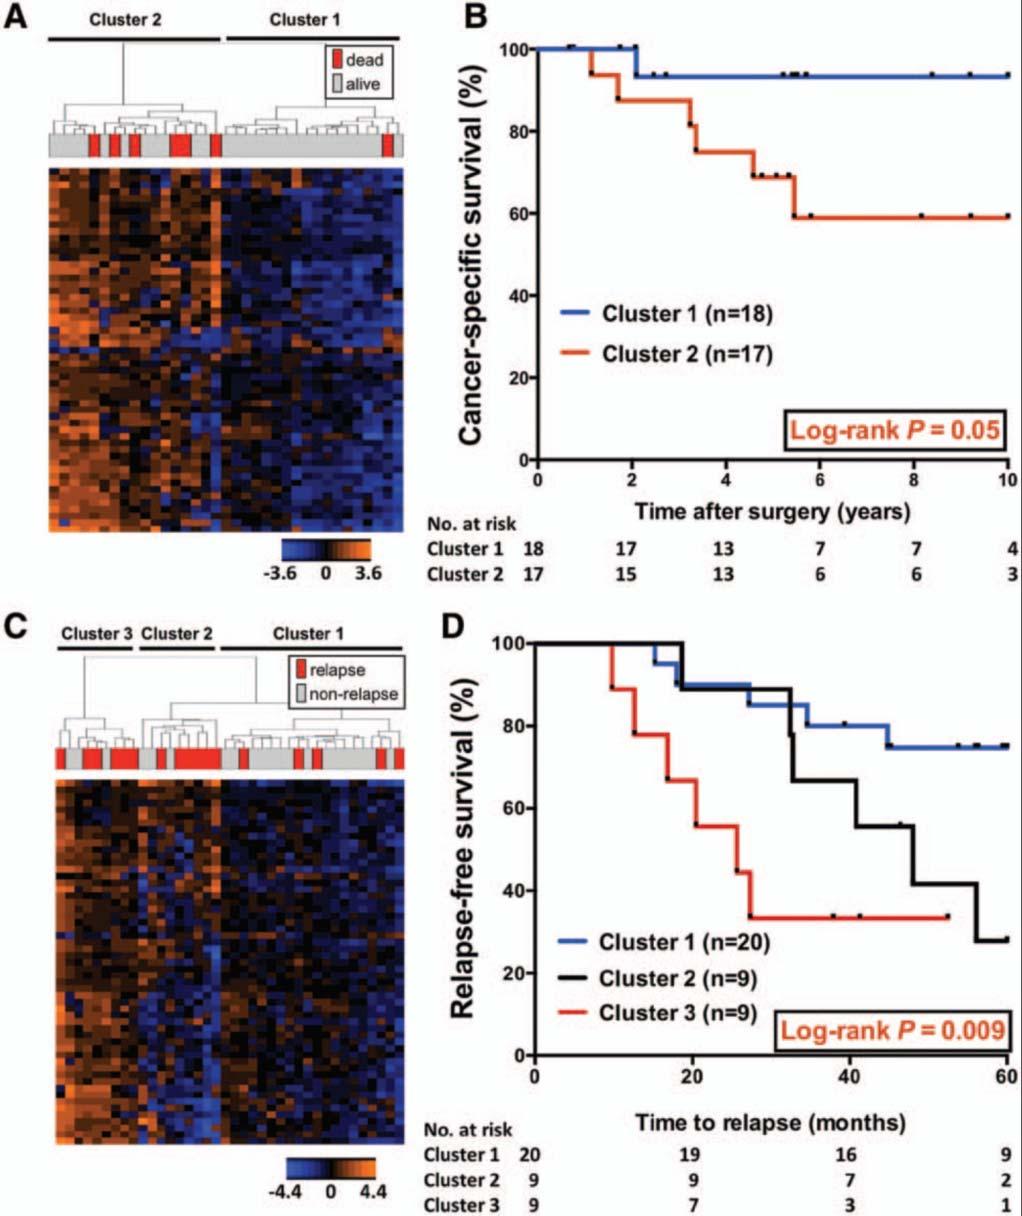 HOXA9 promoter methylation stratifies lung cancer outcome in two independent patient cohorts National Cancer Institute (NCI) microarray cohort Each column represents an individual patient and each